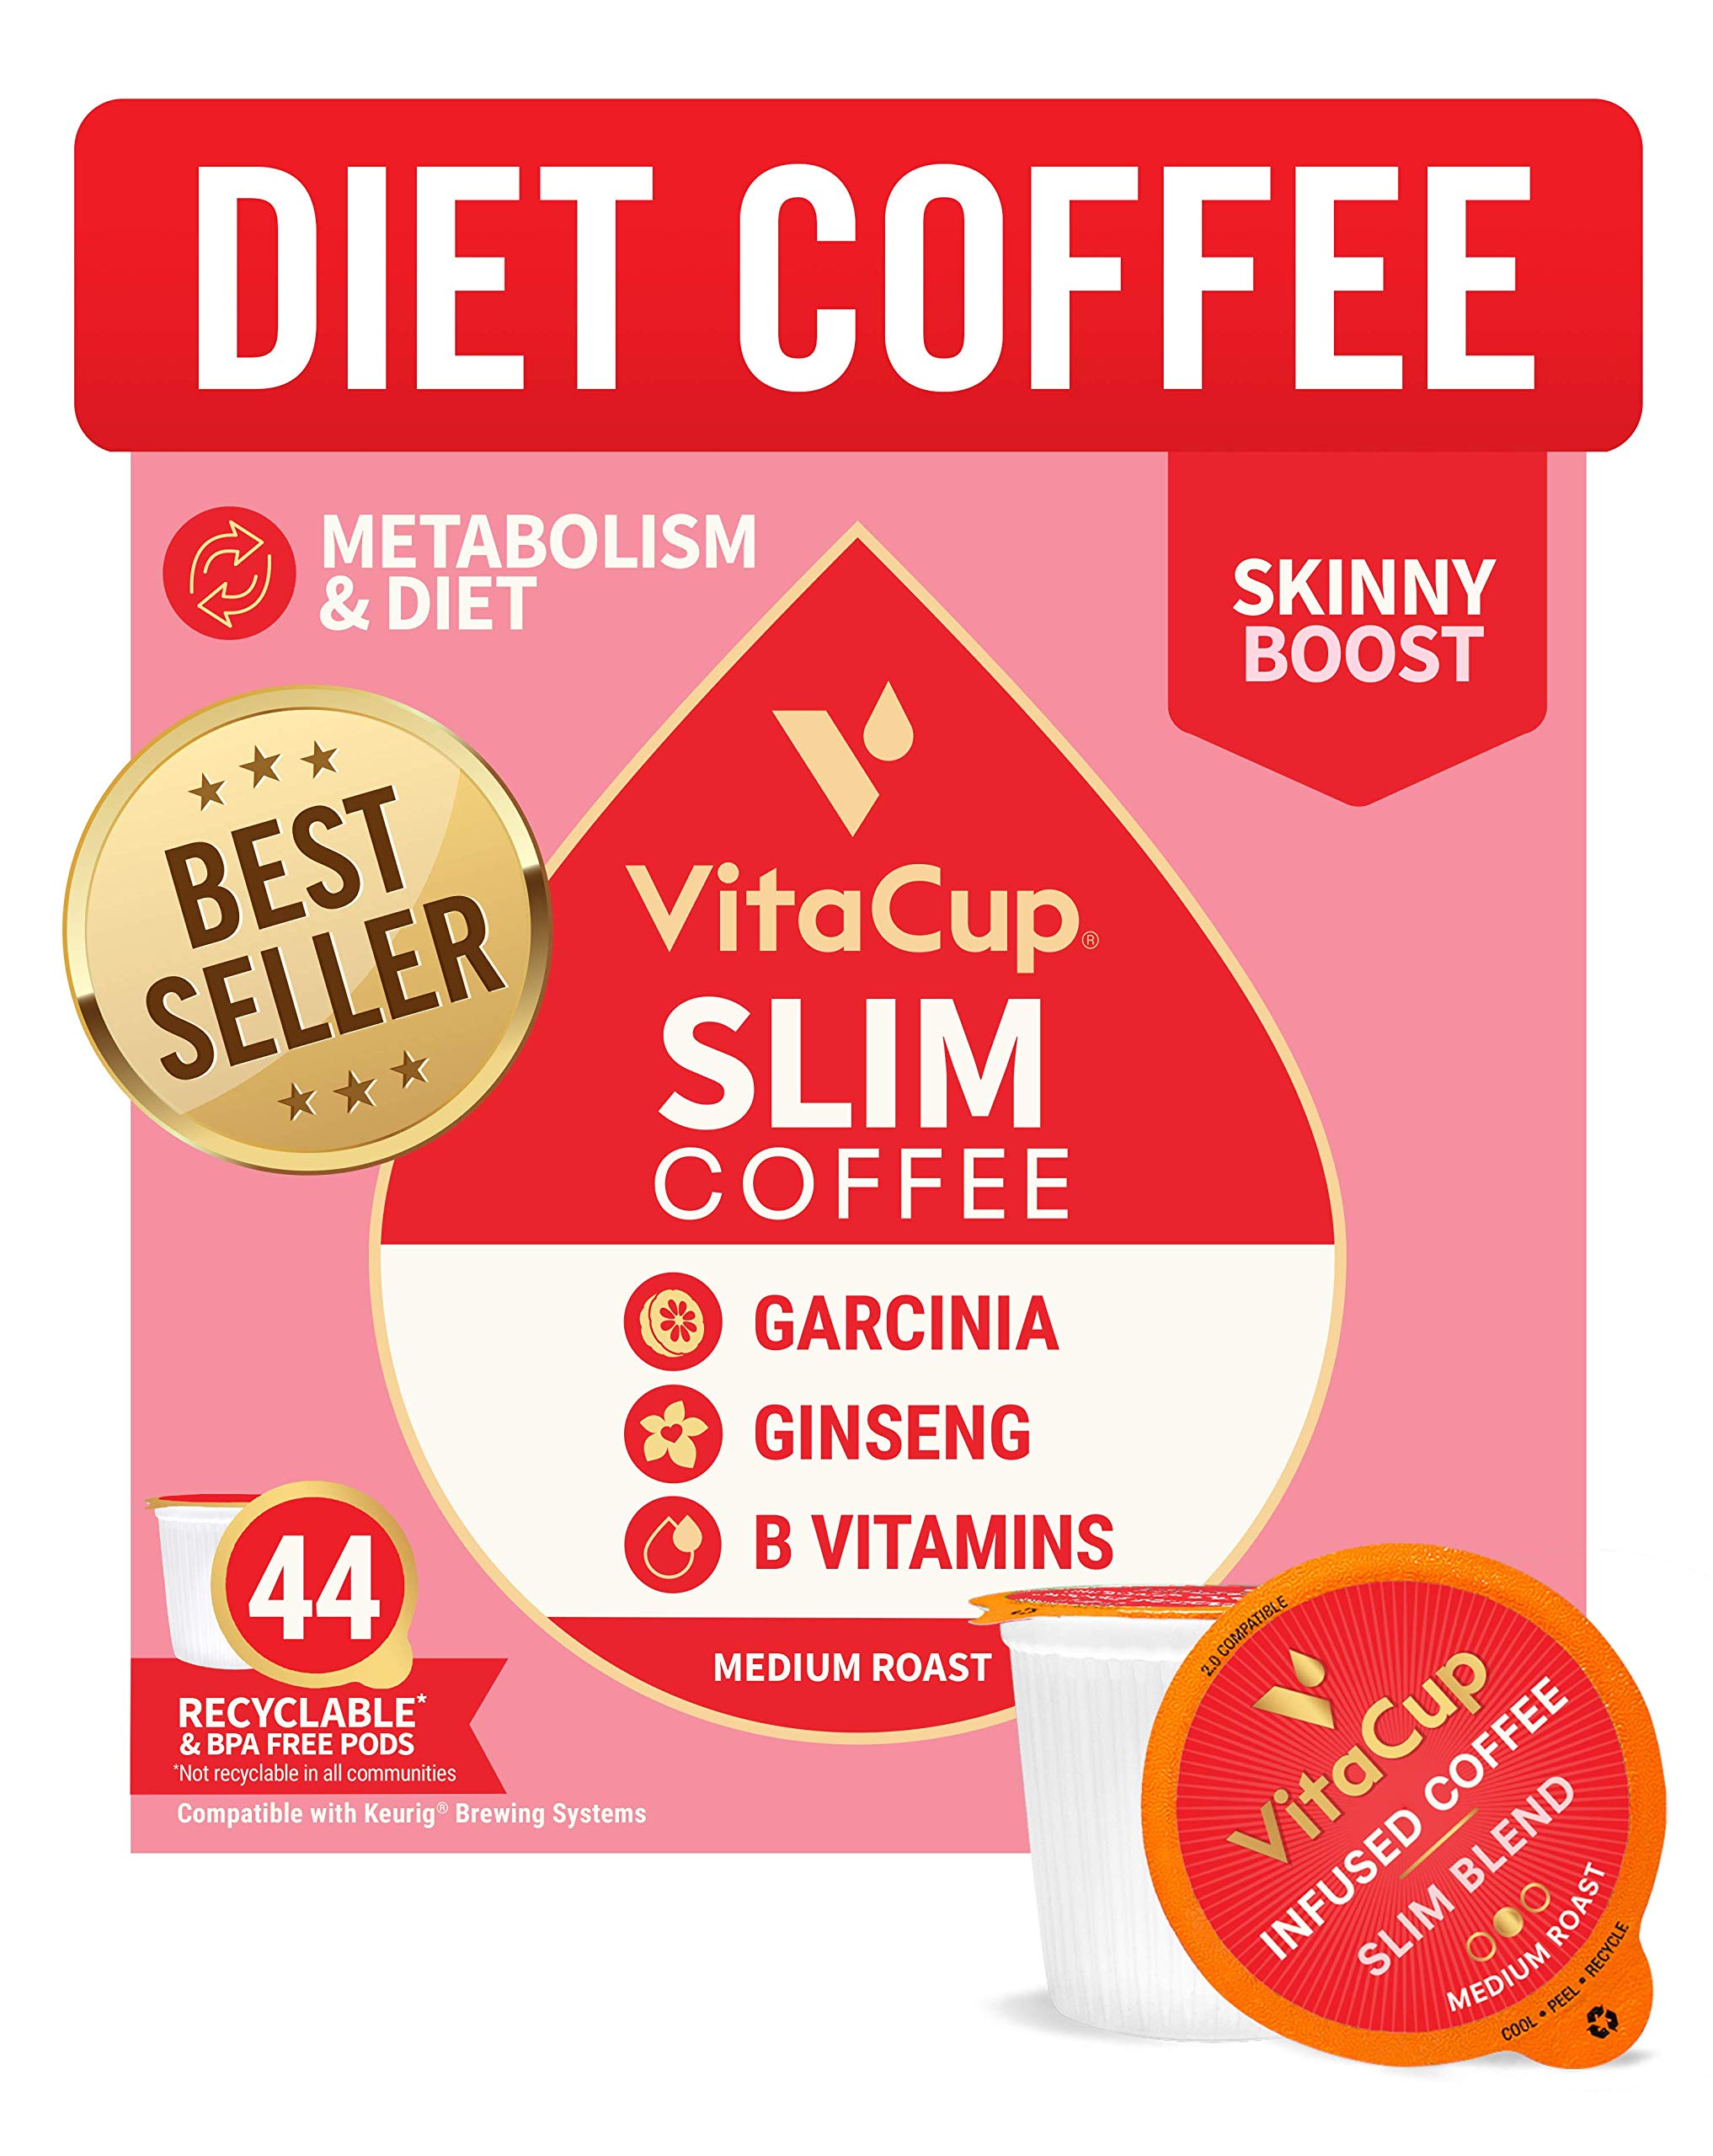 VitaCup Slim Coffee Pods For Skinny Diet & Metabolism with Garcinia, Ginseng & Vitamins B1, B5, B6, B9, B12 in Recyclable Single Serve Pod Compatib...